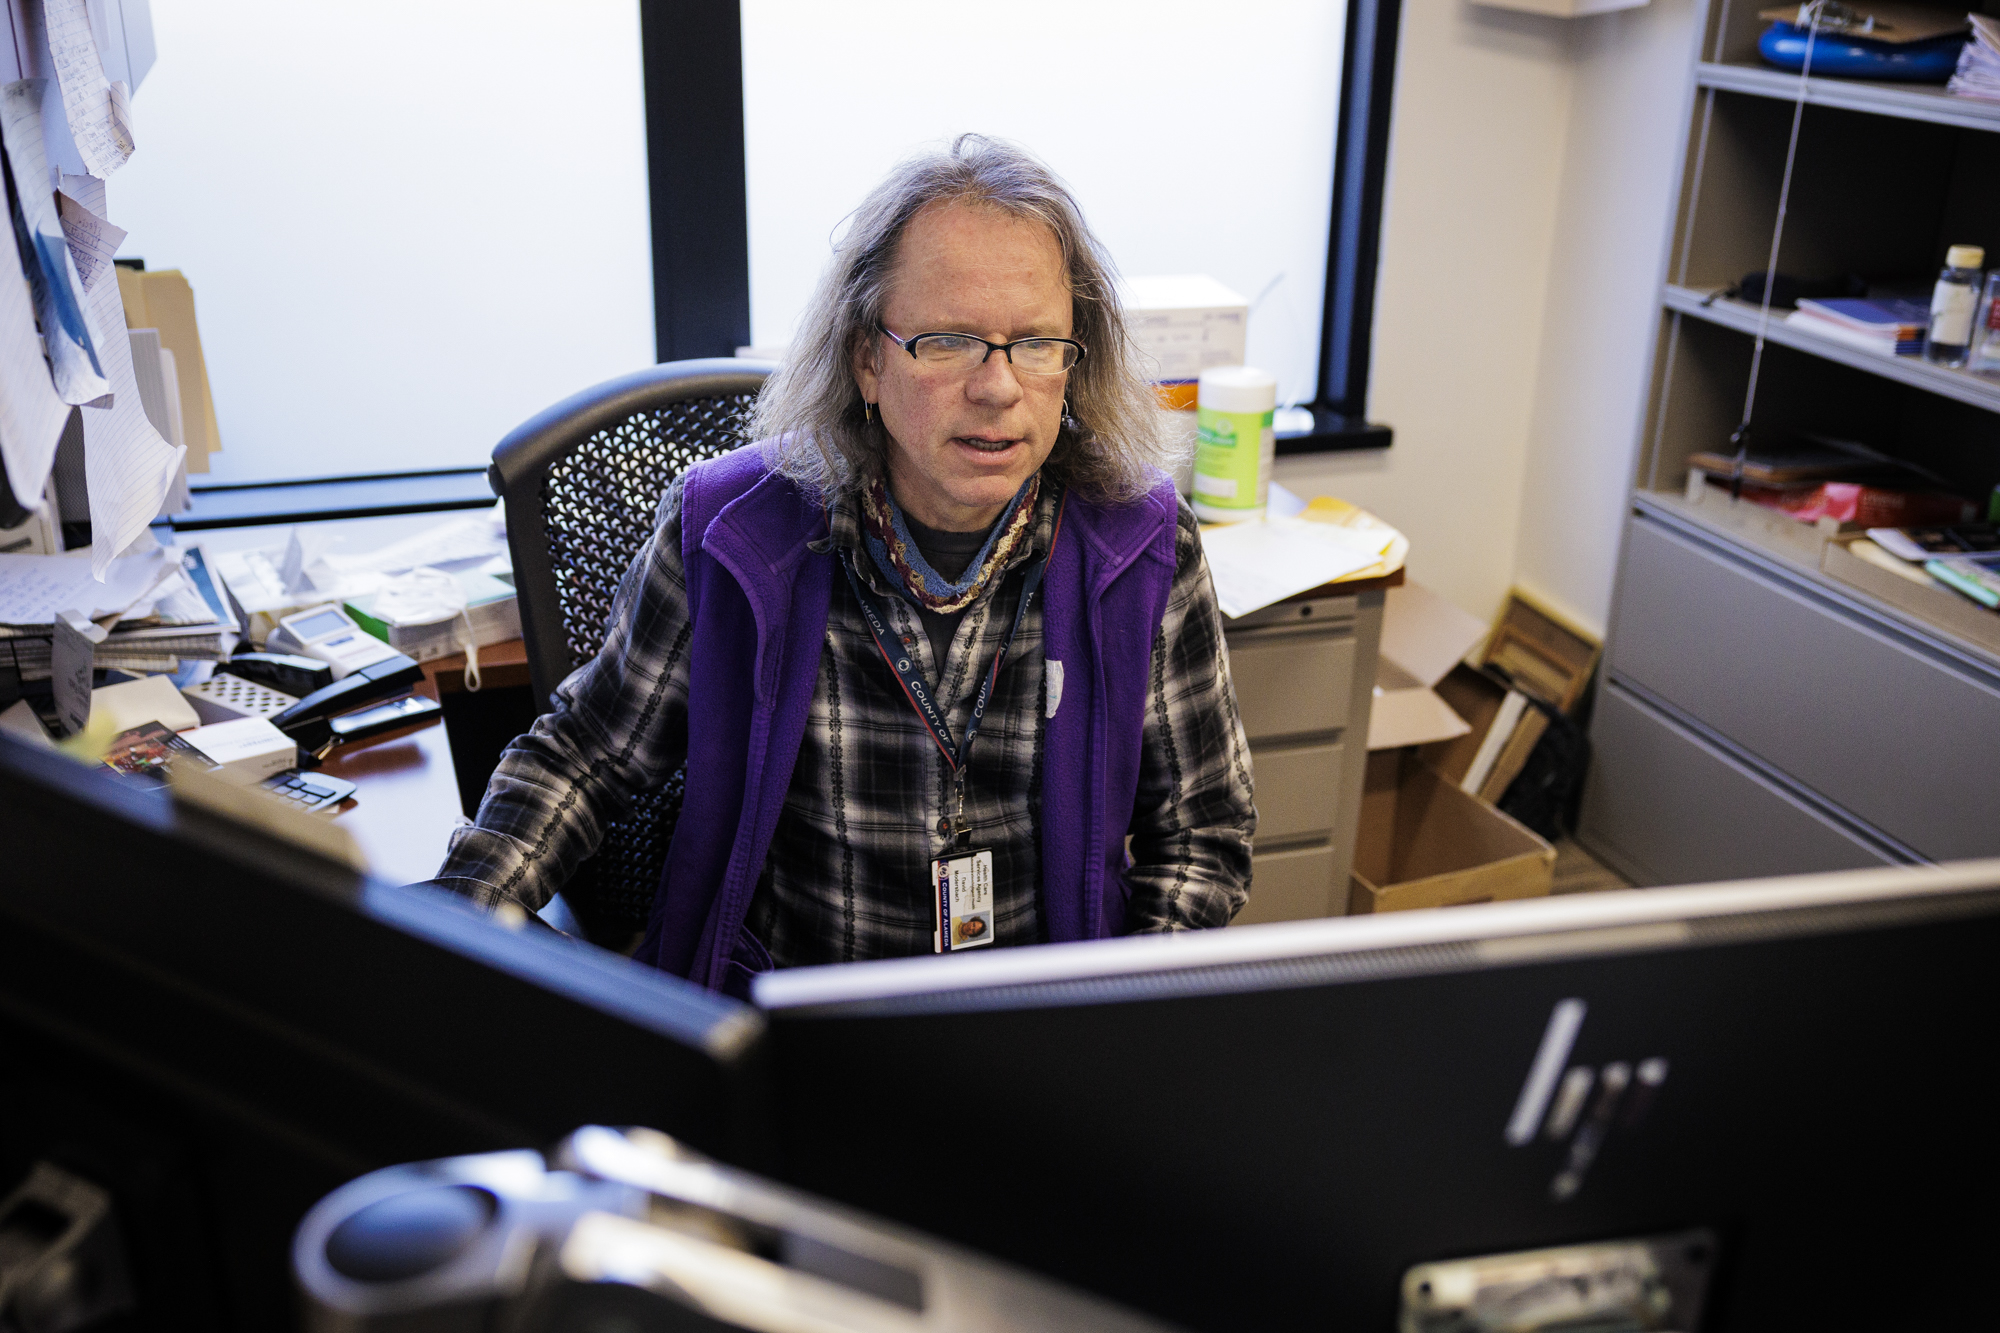 a man with glasses and long hair, wearing a flannel shirt, sits behind a computer